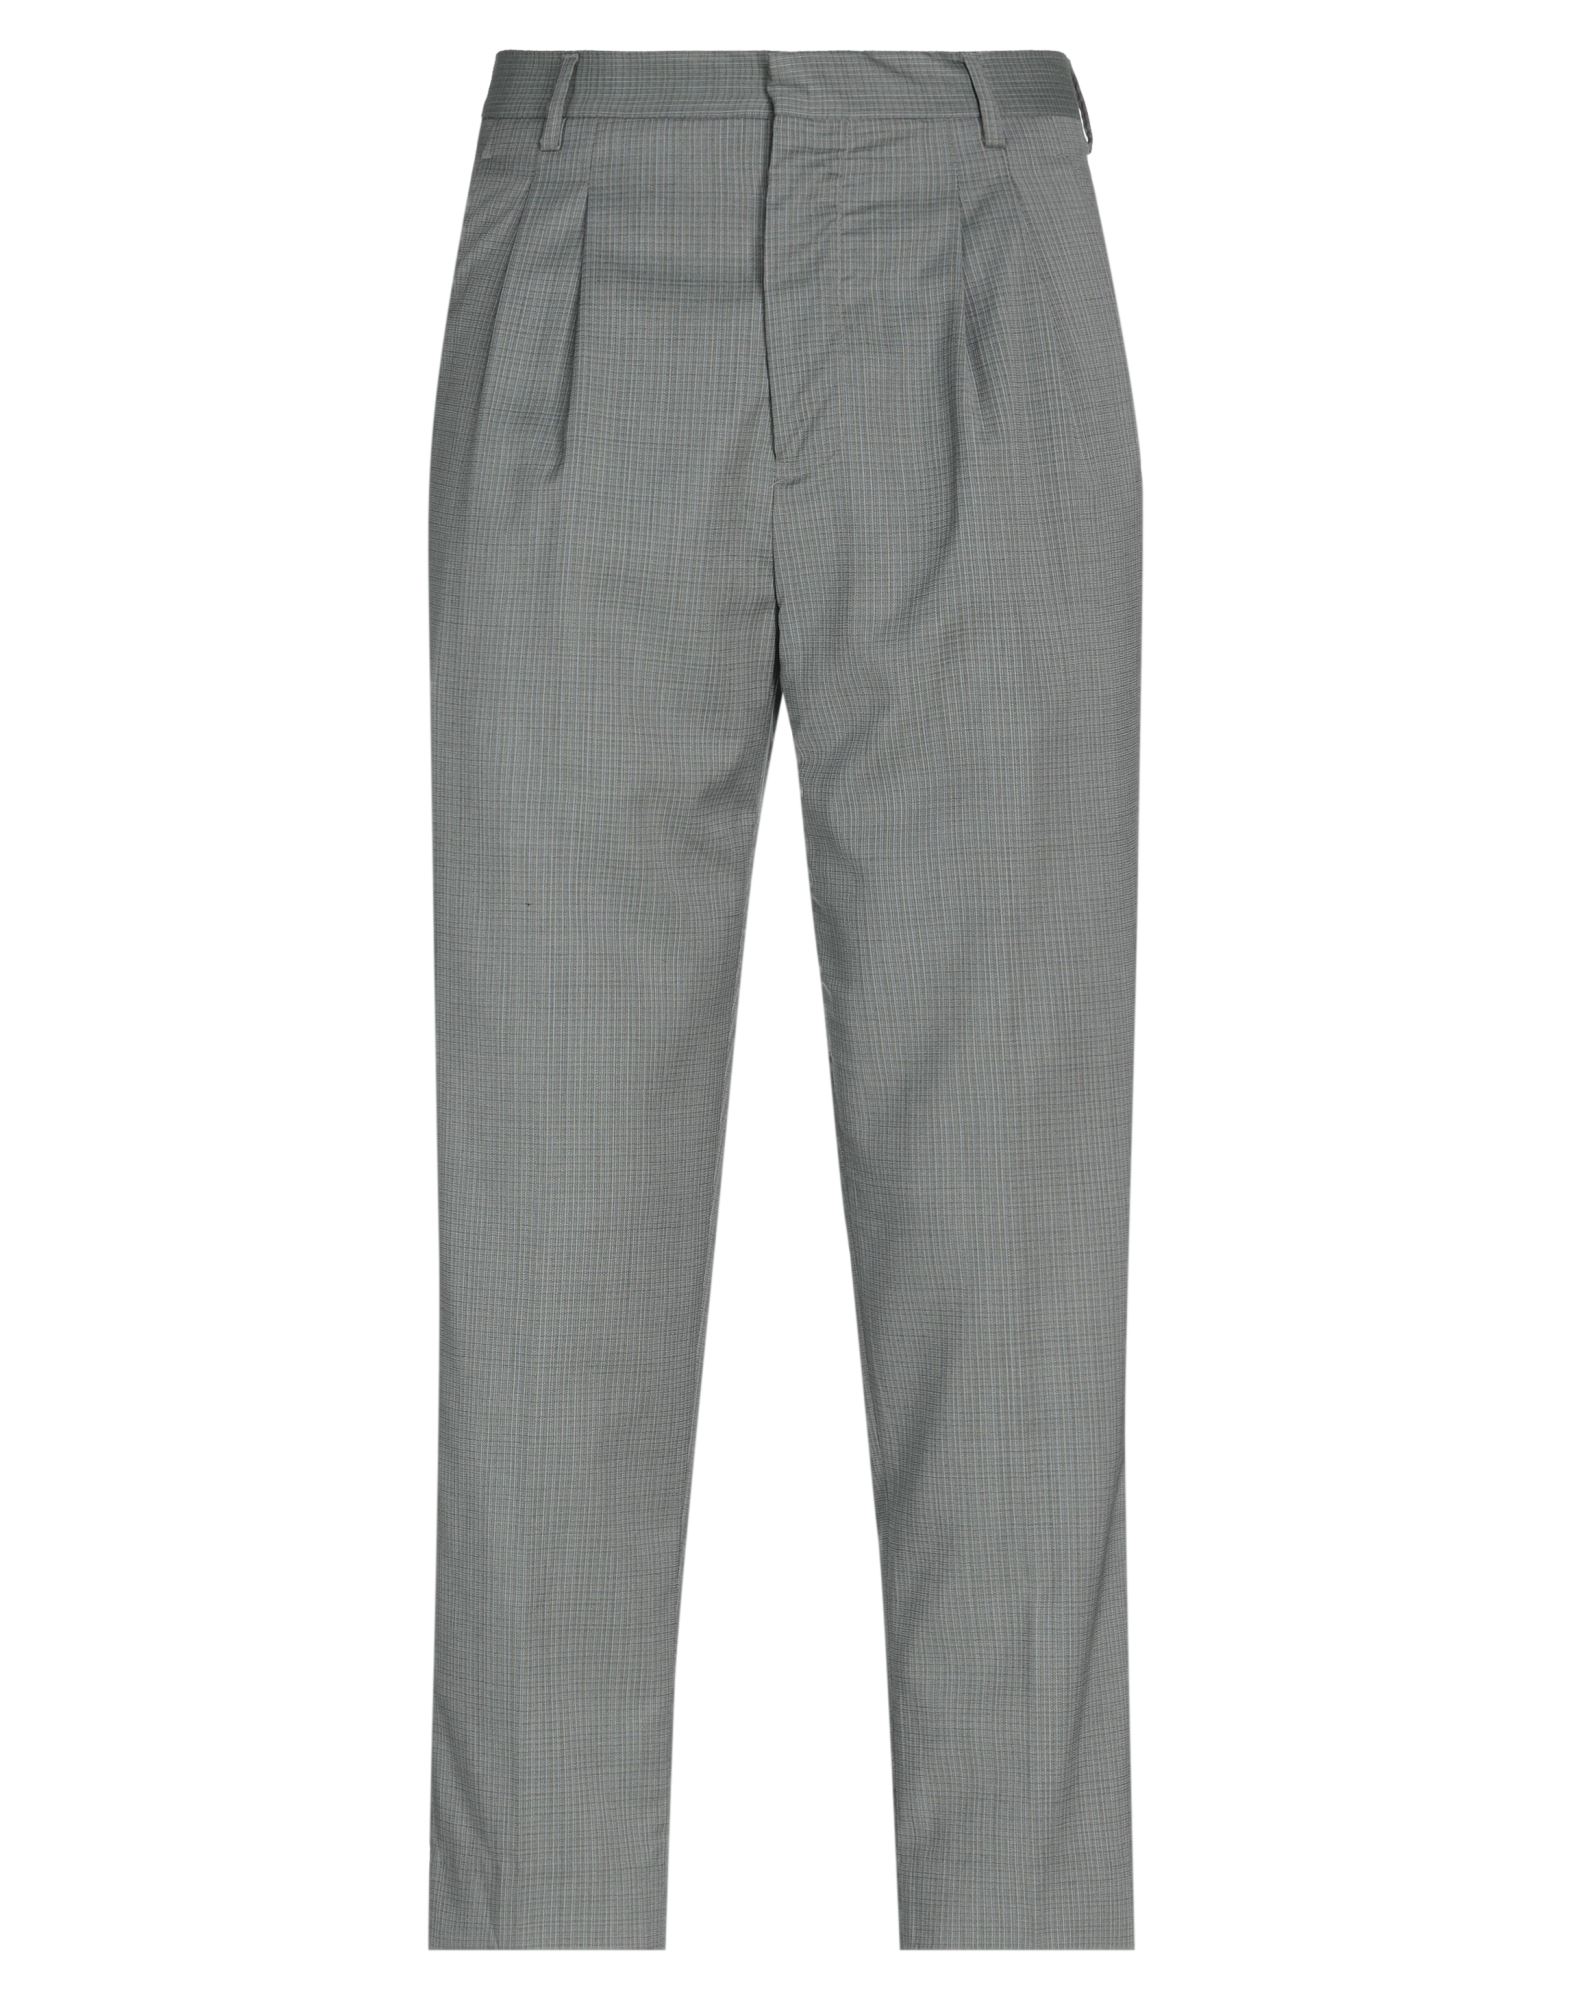 Mauro Grifoni Pants In Sage Green | ModeSens